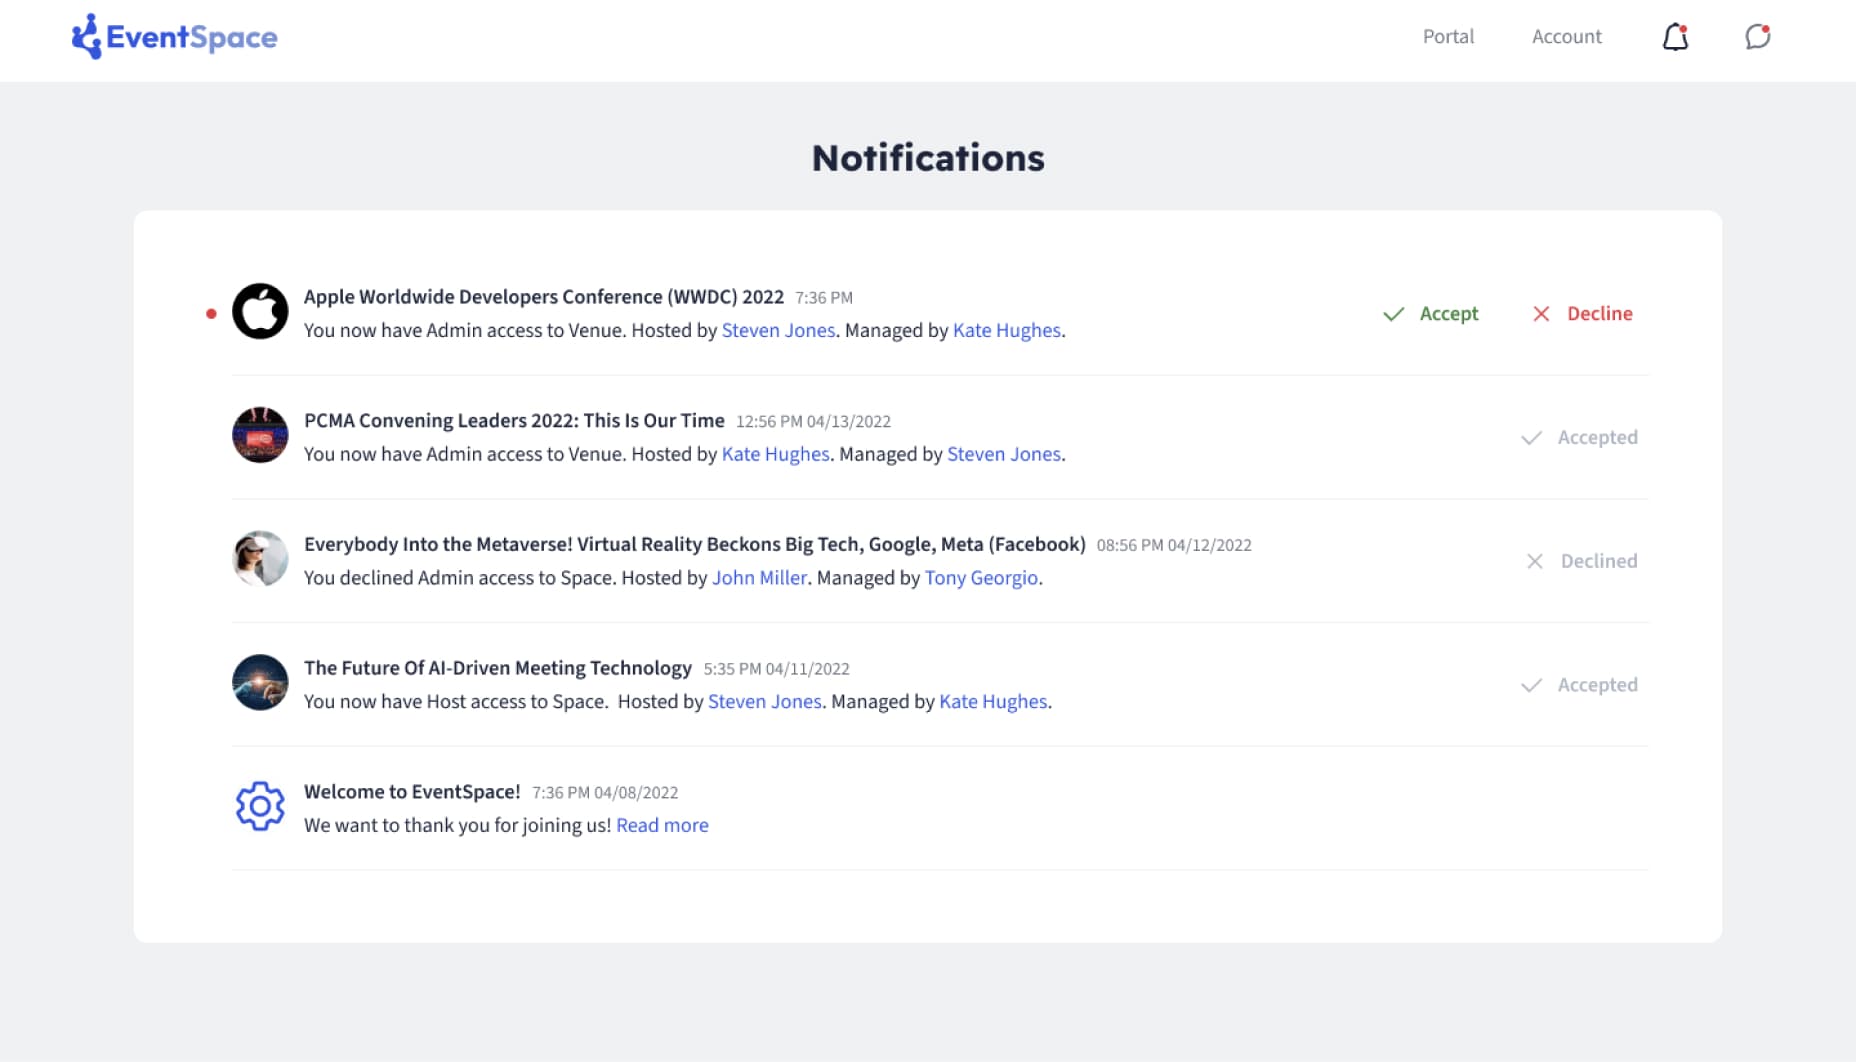 EventSpace Notifications Page